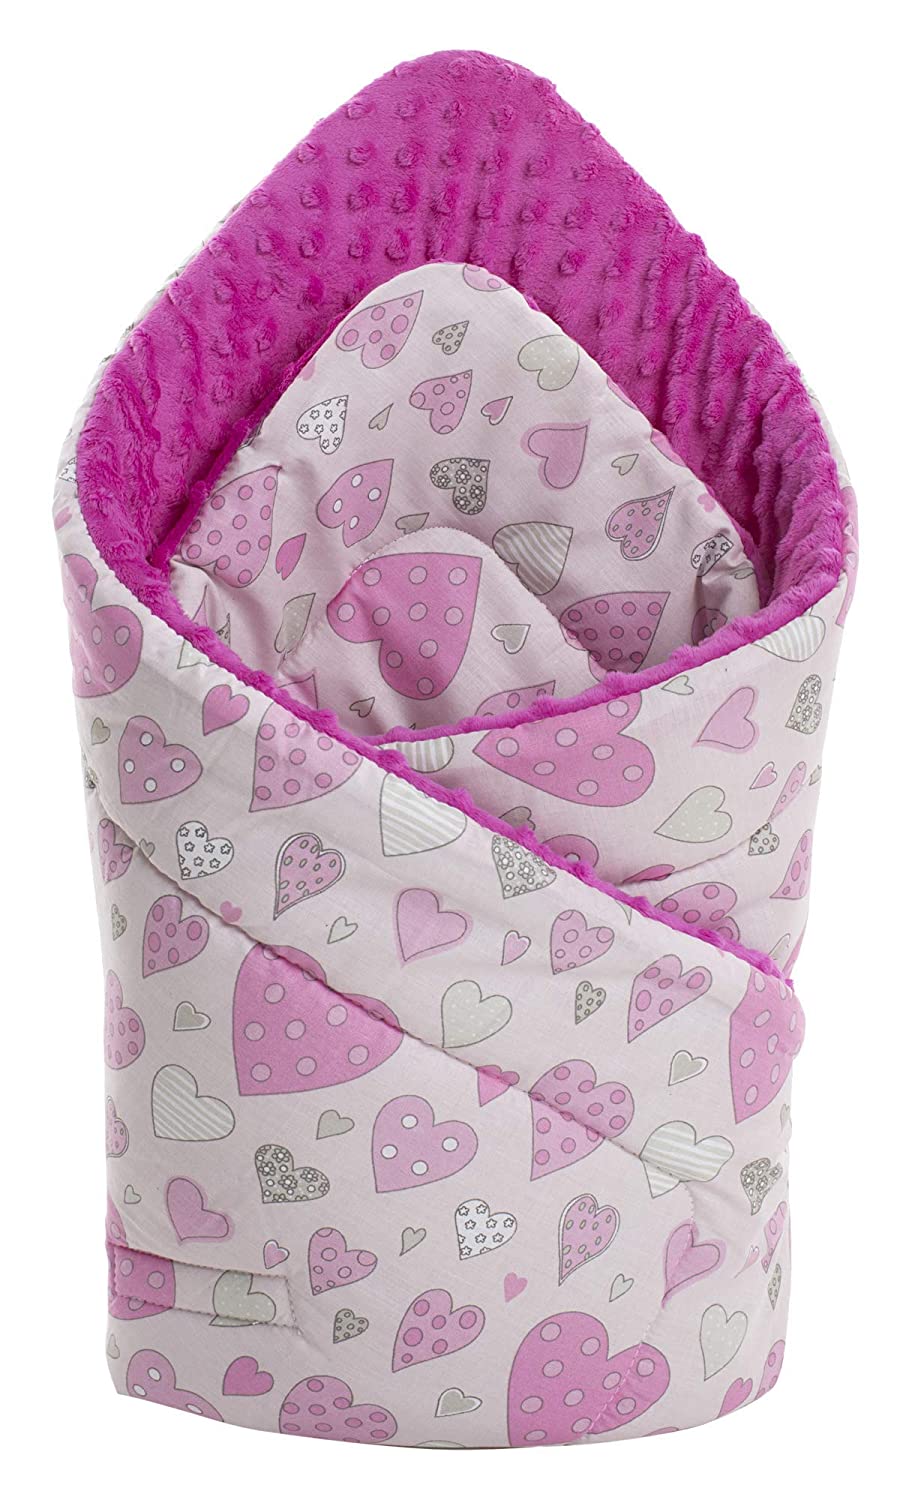 Minky Swaddling Blanket, 100% Cotton, 75 x 75 cm, Baby Pillow Double-Sided Soft All Year Round Multifunctional, Anti-Allergic, Baby Medi Partners (Pink Hearts with Pink Minky)